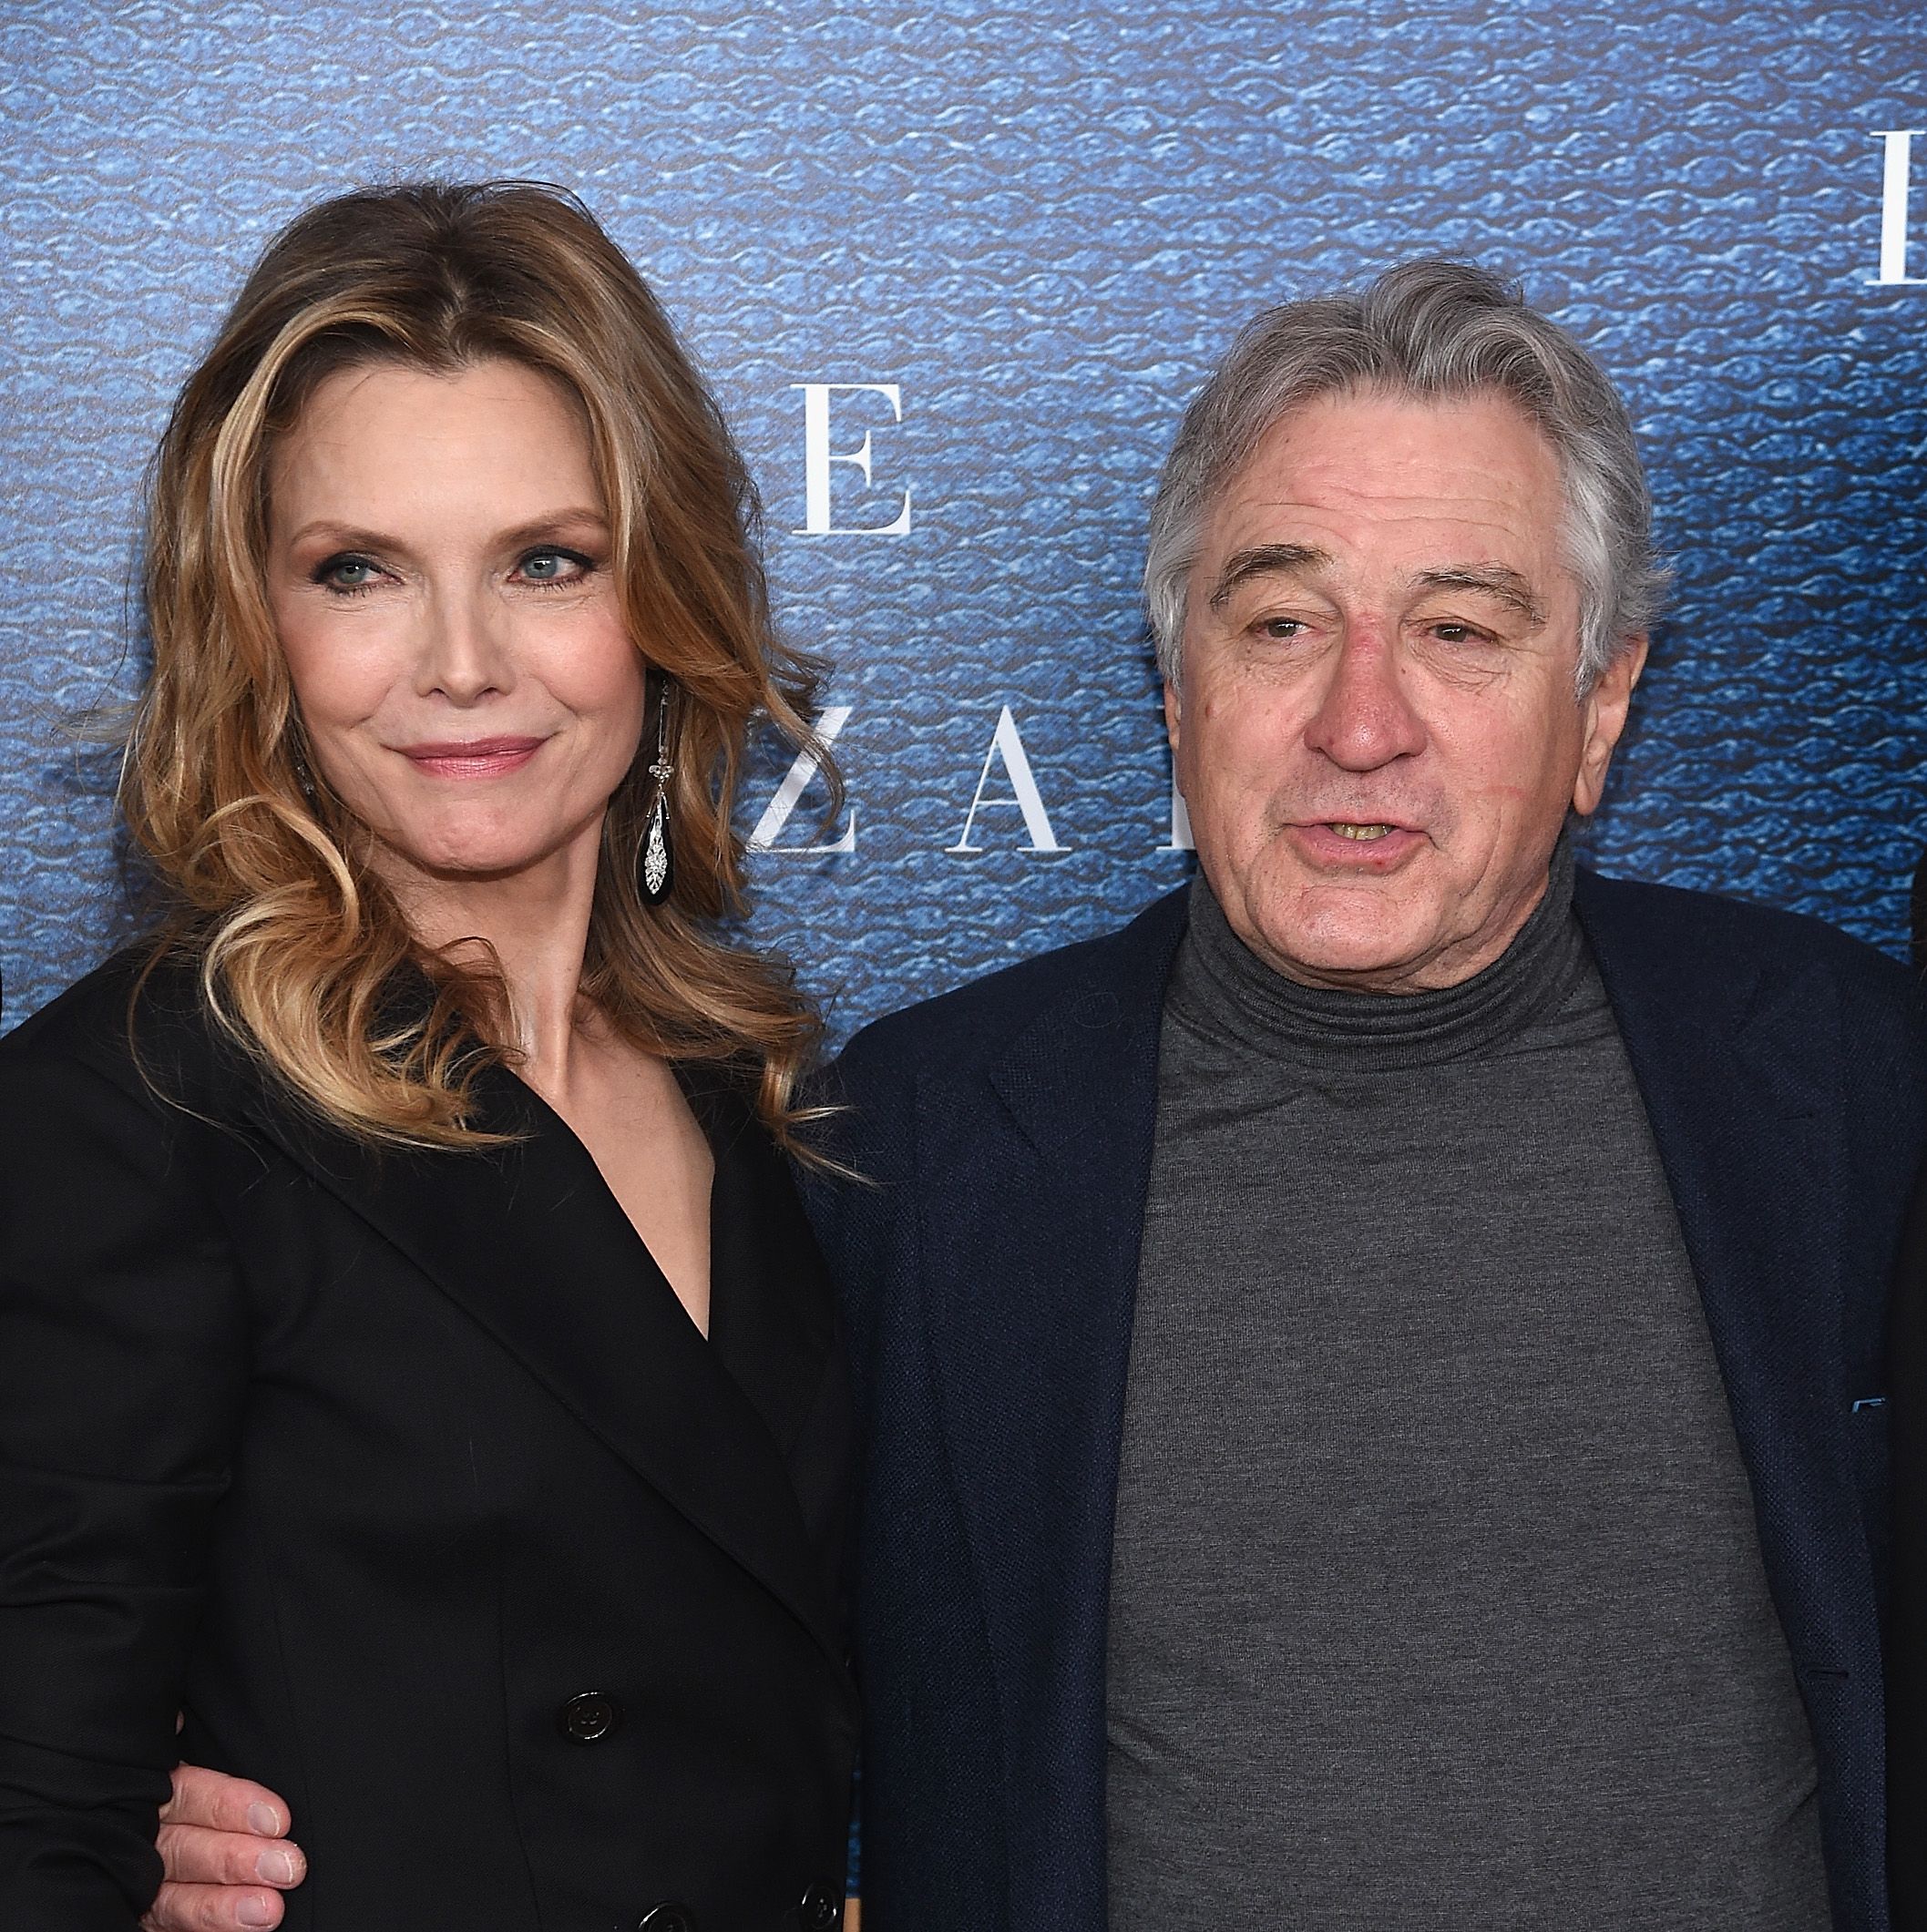 Michelle Pfeiffer and Executive Producer Robert De Niro attend the 'The Wizard Of Lies' New York Premiere at The Museum of Modern Art on May 11, 2017 in New York City